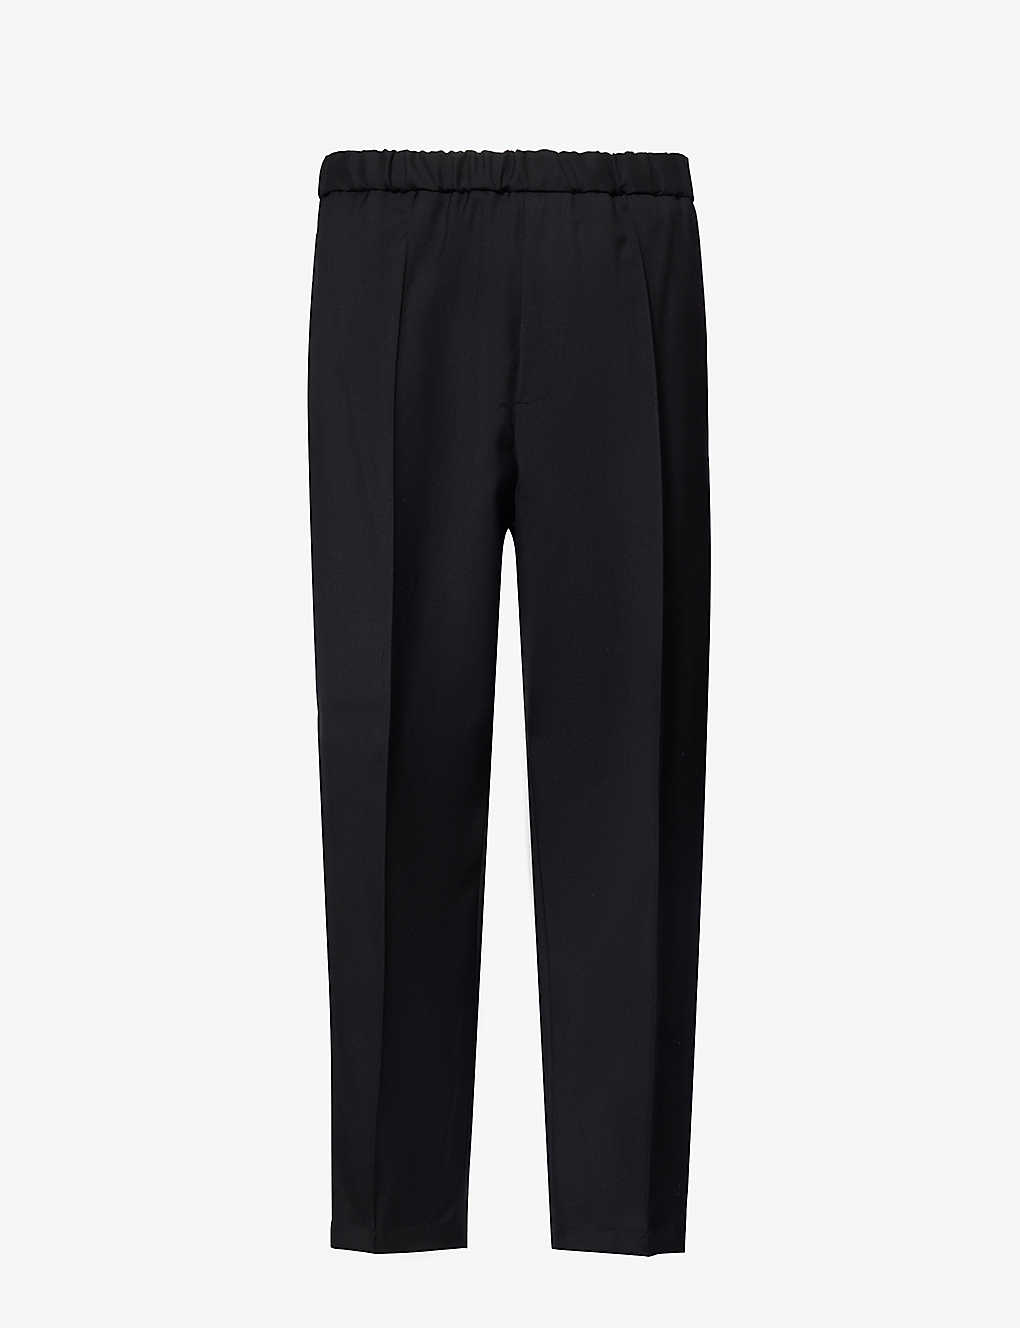 Jil Sander Mens Black Relaxed-fit Tapered Wool Trousers